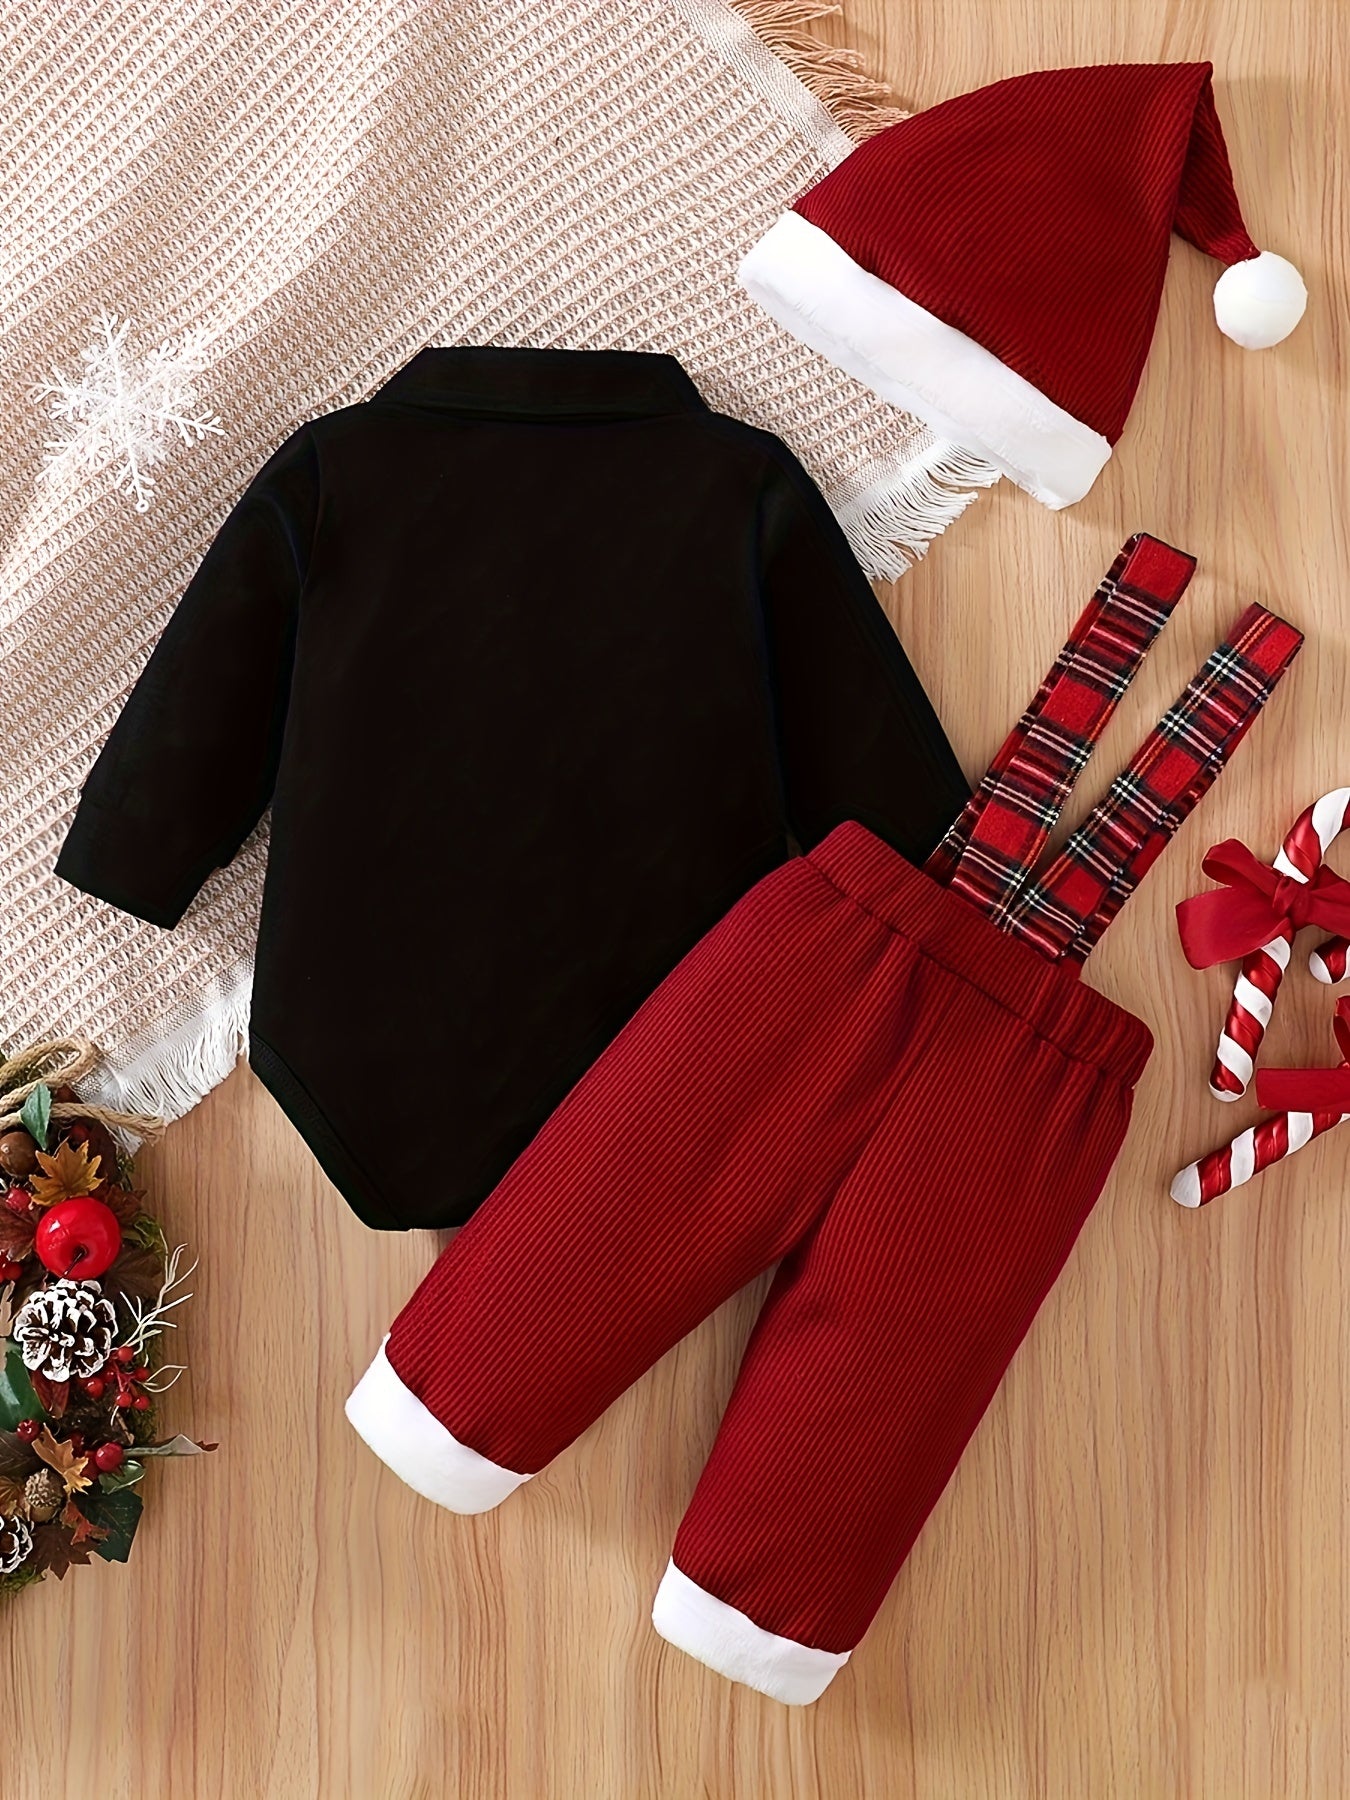 Toddler Baby Boys Bow Tie Long Sleeve Romper + Waffle Splicing Bib Pants + Hat 3pcs Cute Set Party Christmas Outfit